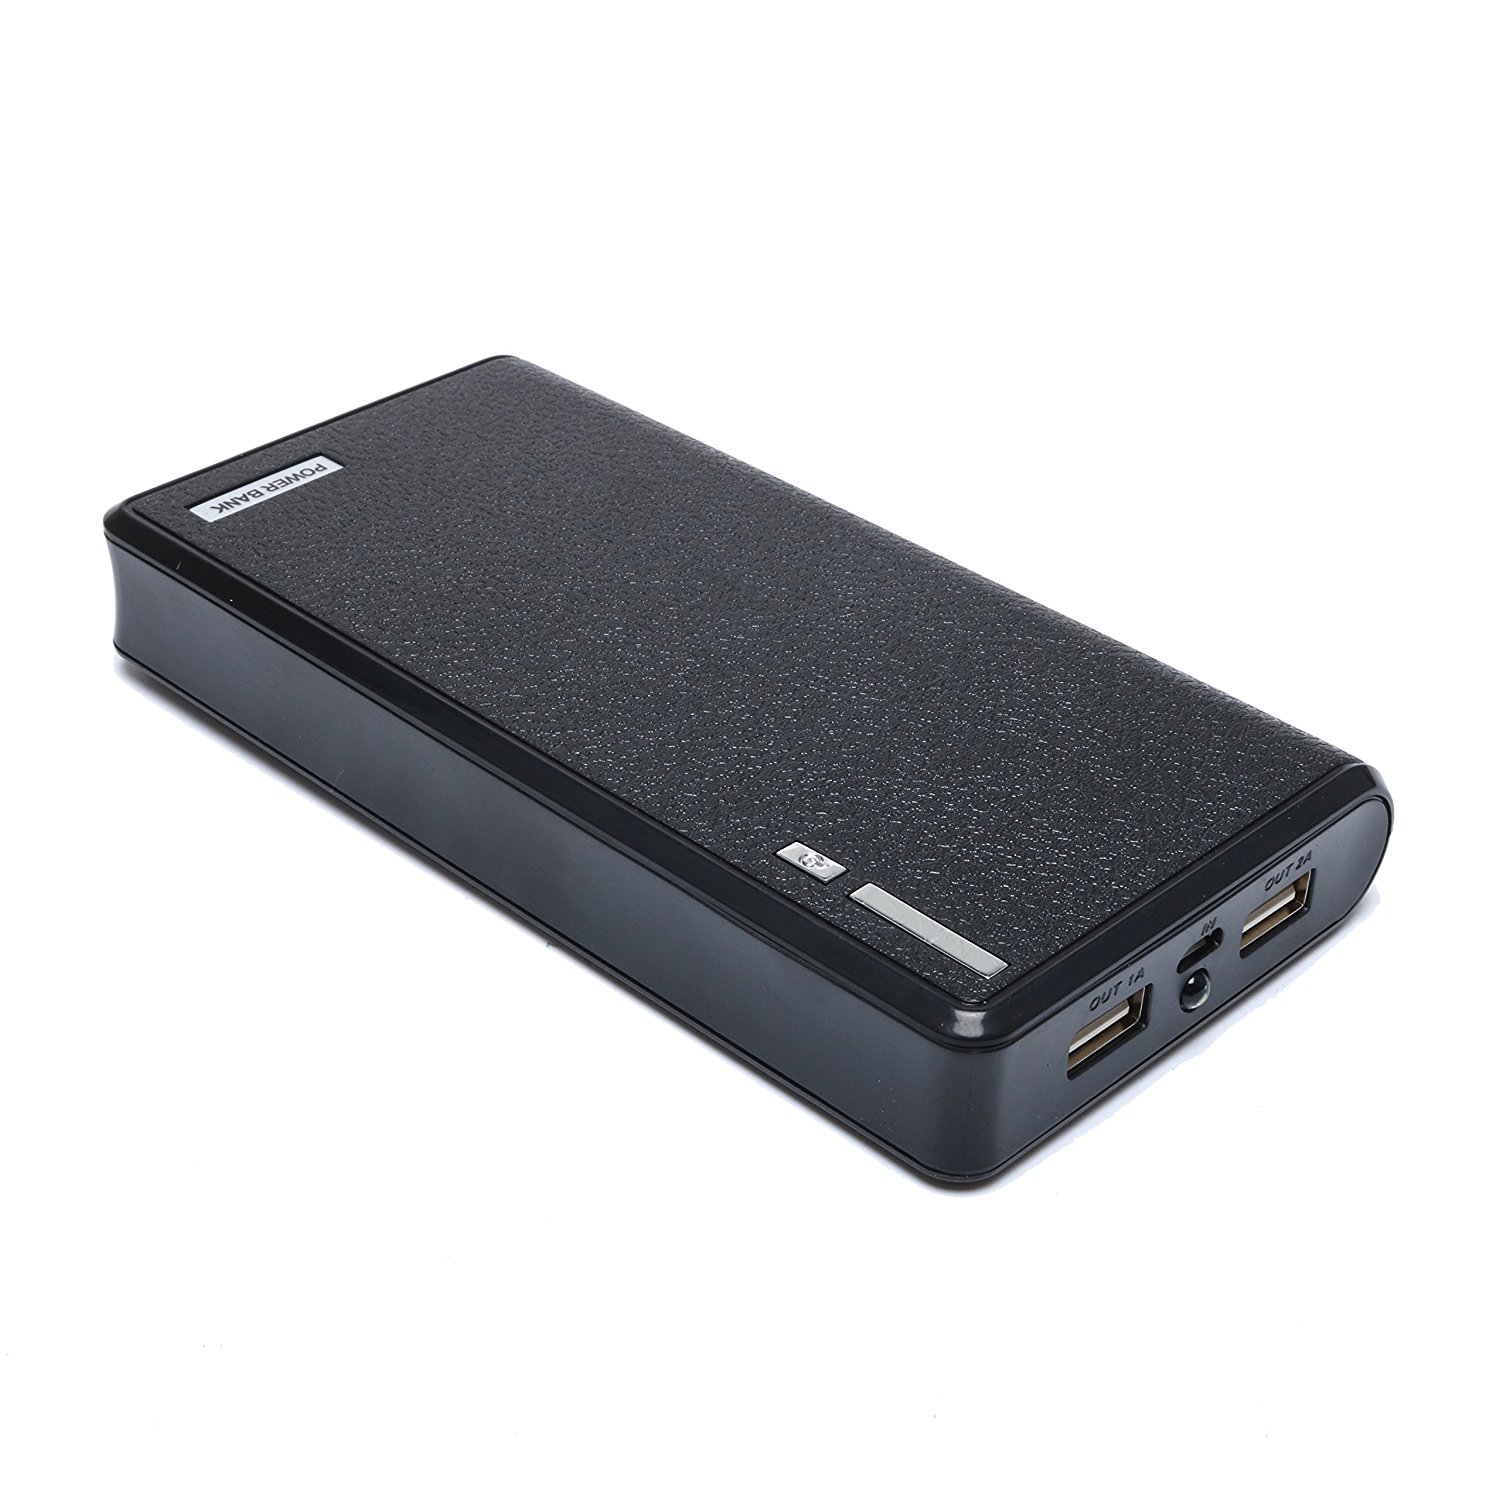 20000mAh Portable Charger External Battery Power Bank for iPhone 6 6S Plus 5S, iPad ...1500 x 1490